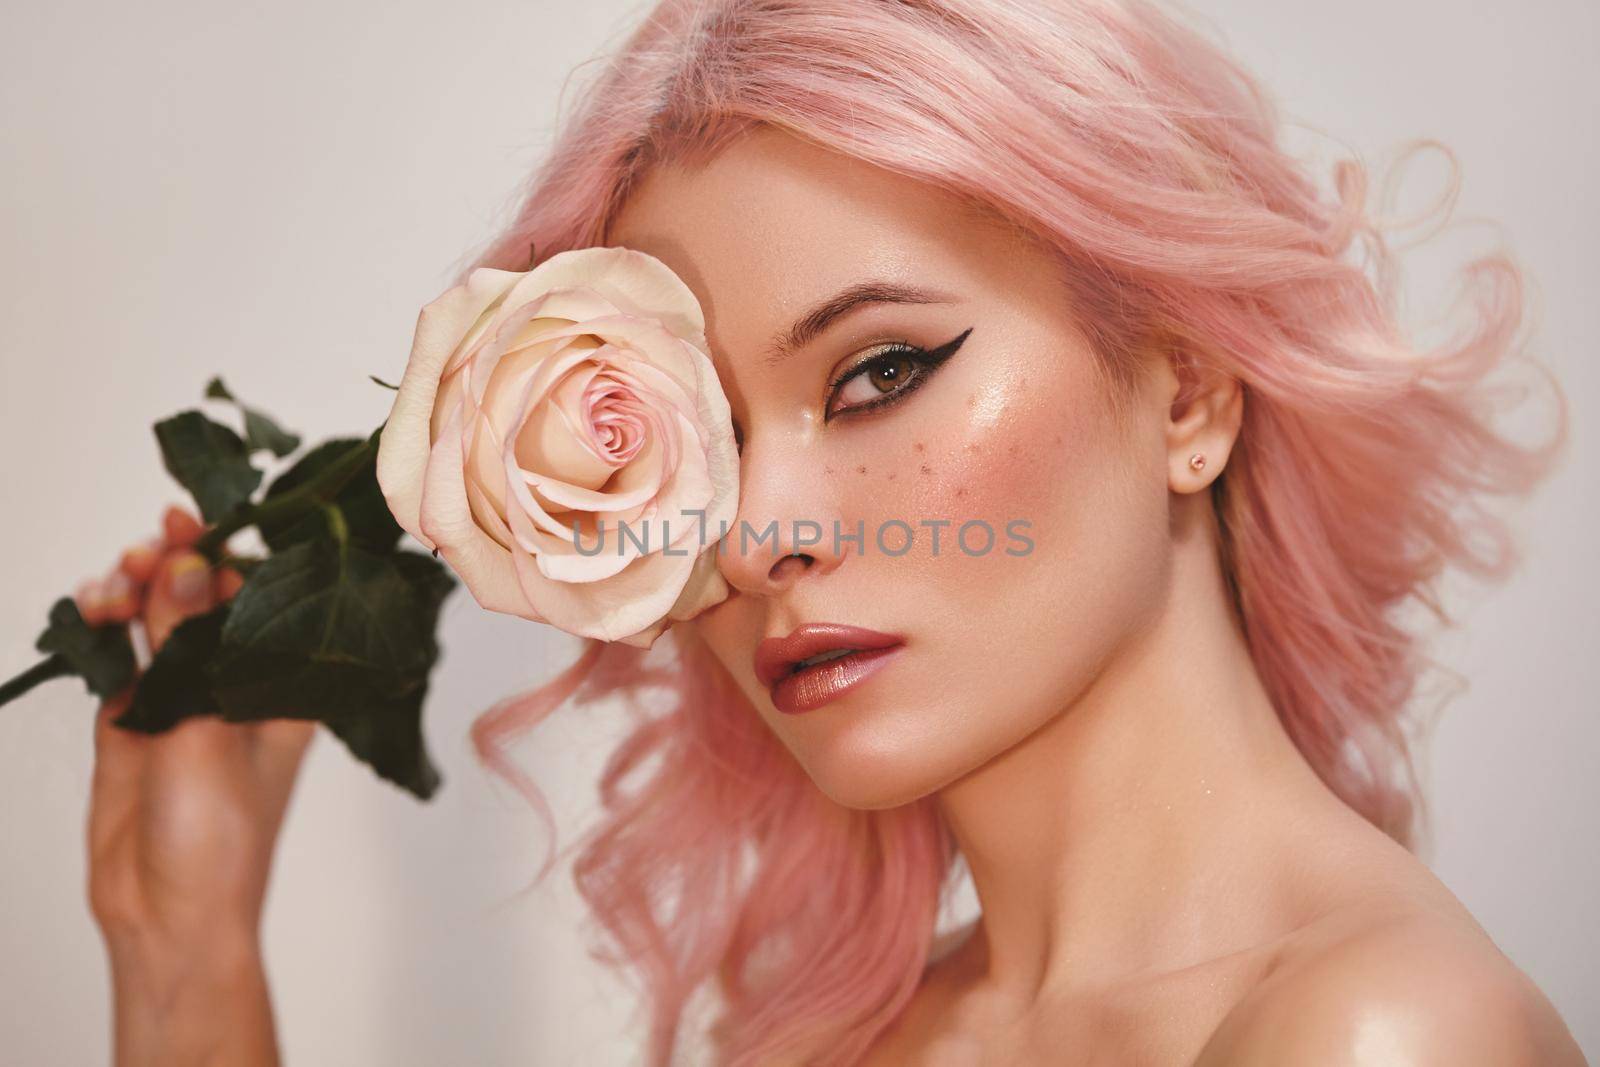 Soft-Girl Style with Trend Pink Flying Hair, Fashion Make-up. Woman Face with Fake Freckles, Blush Rouge and Rose Flowers. Valentines Day Look, Womens Day, March 8 or Freshness Spring Style